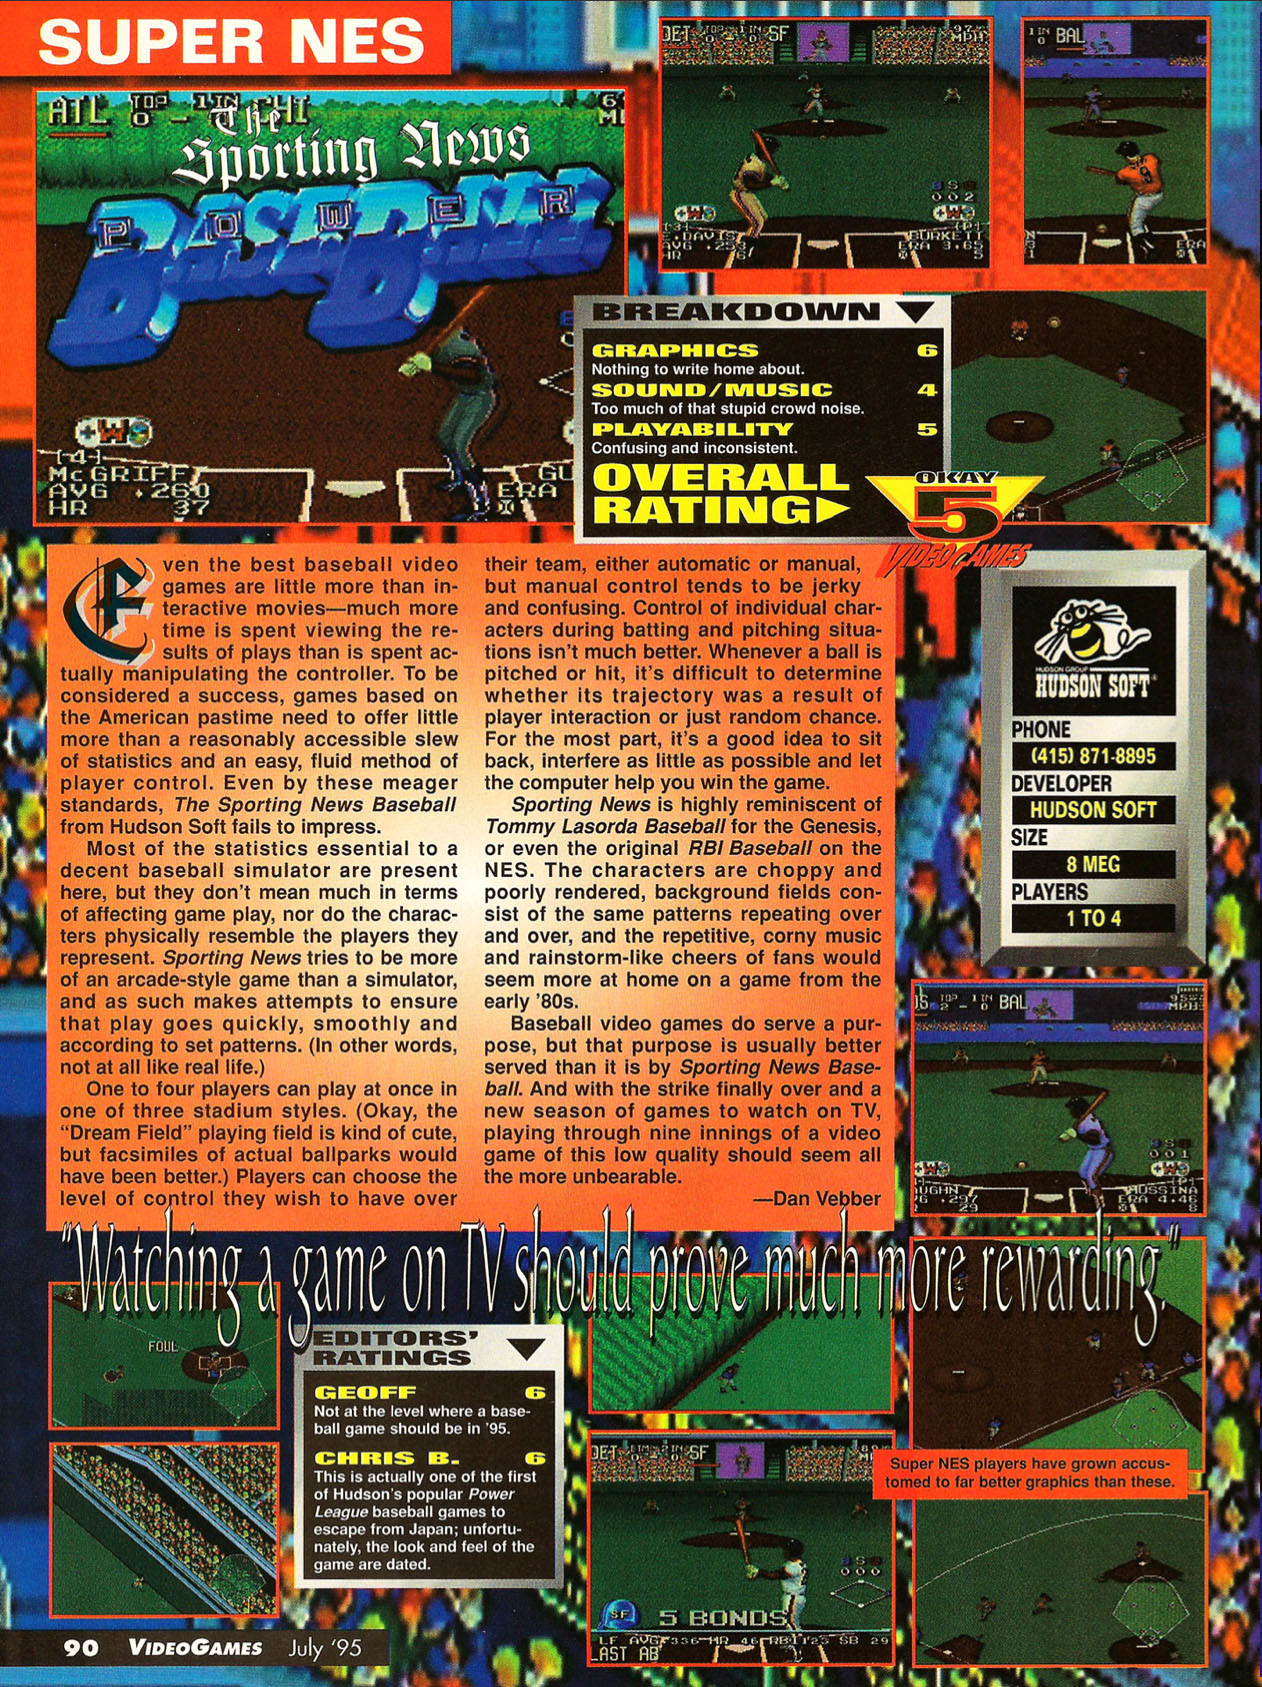 Sporting News Baseball Review, Video Games July 1995 page 90